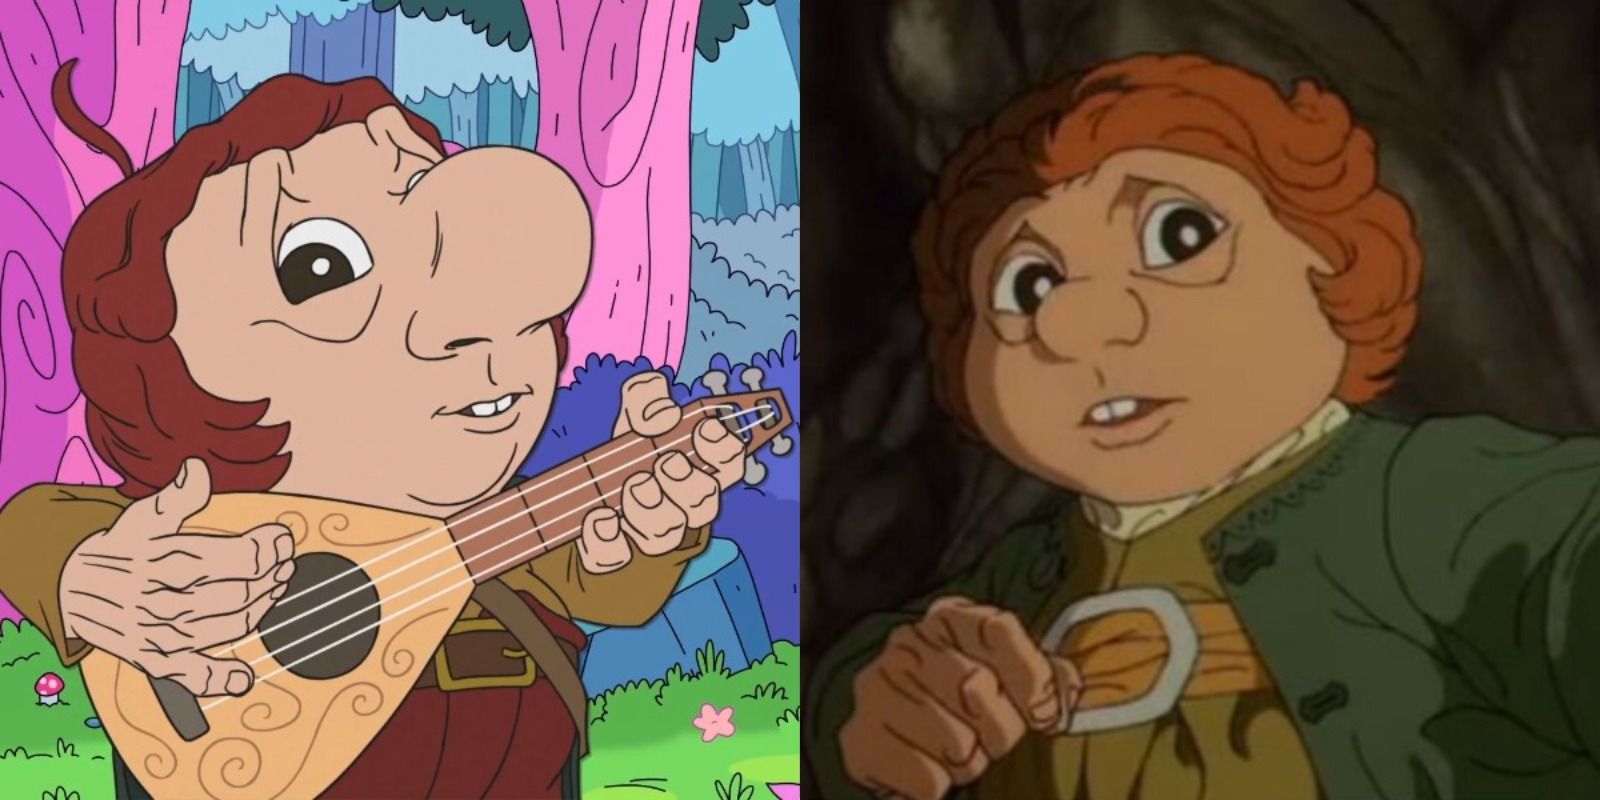 Mip from Smiling Friends and Bilbo from Rankin/Bass' The Hobbit.